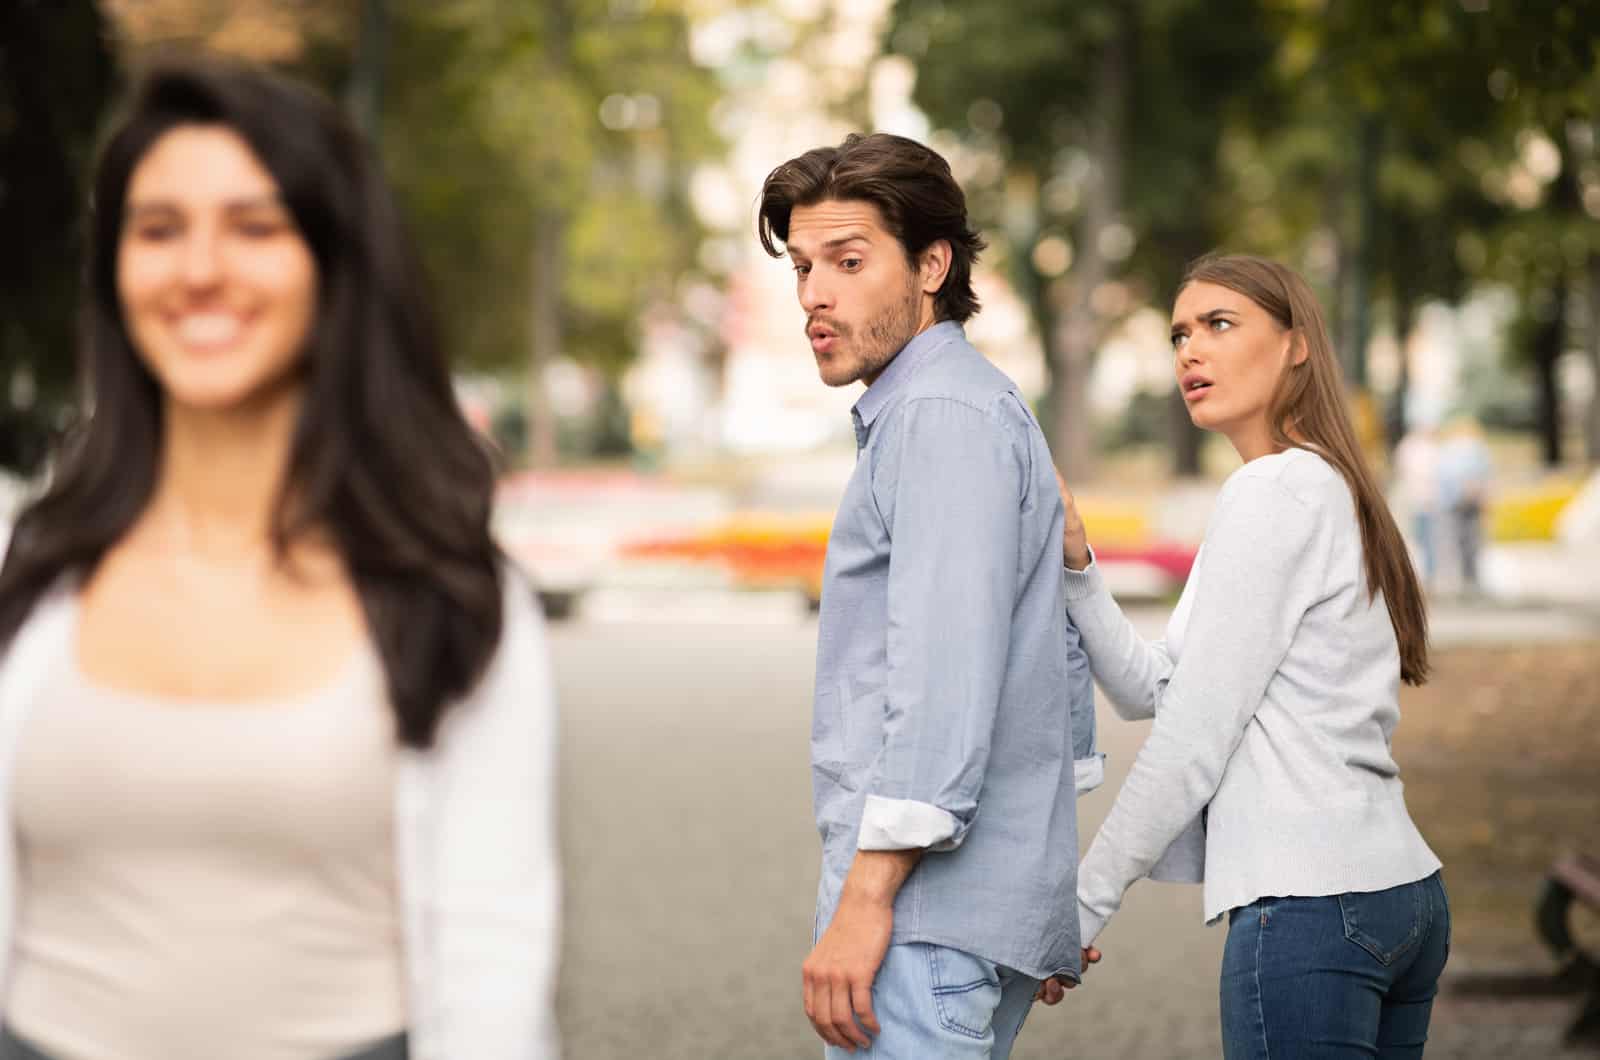 man with girlfriend catcalling other girl